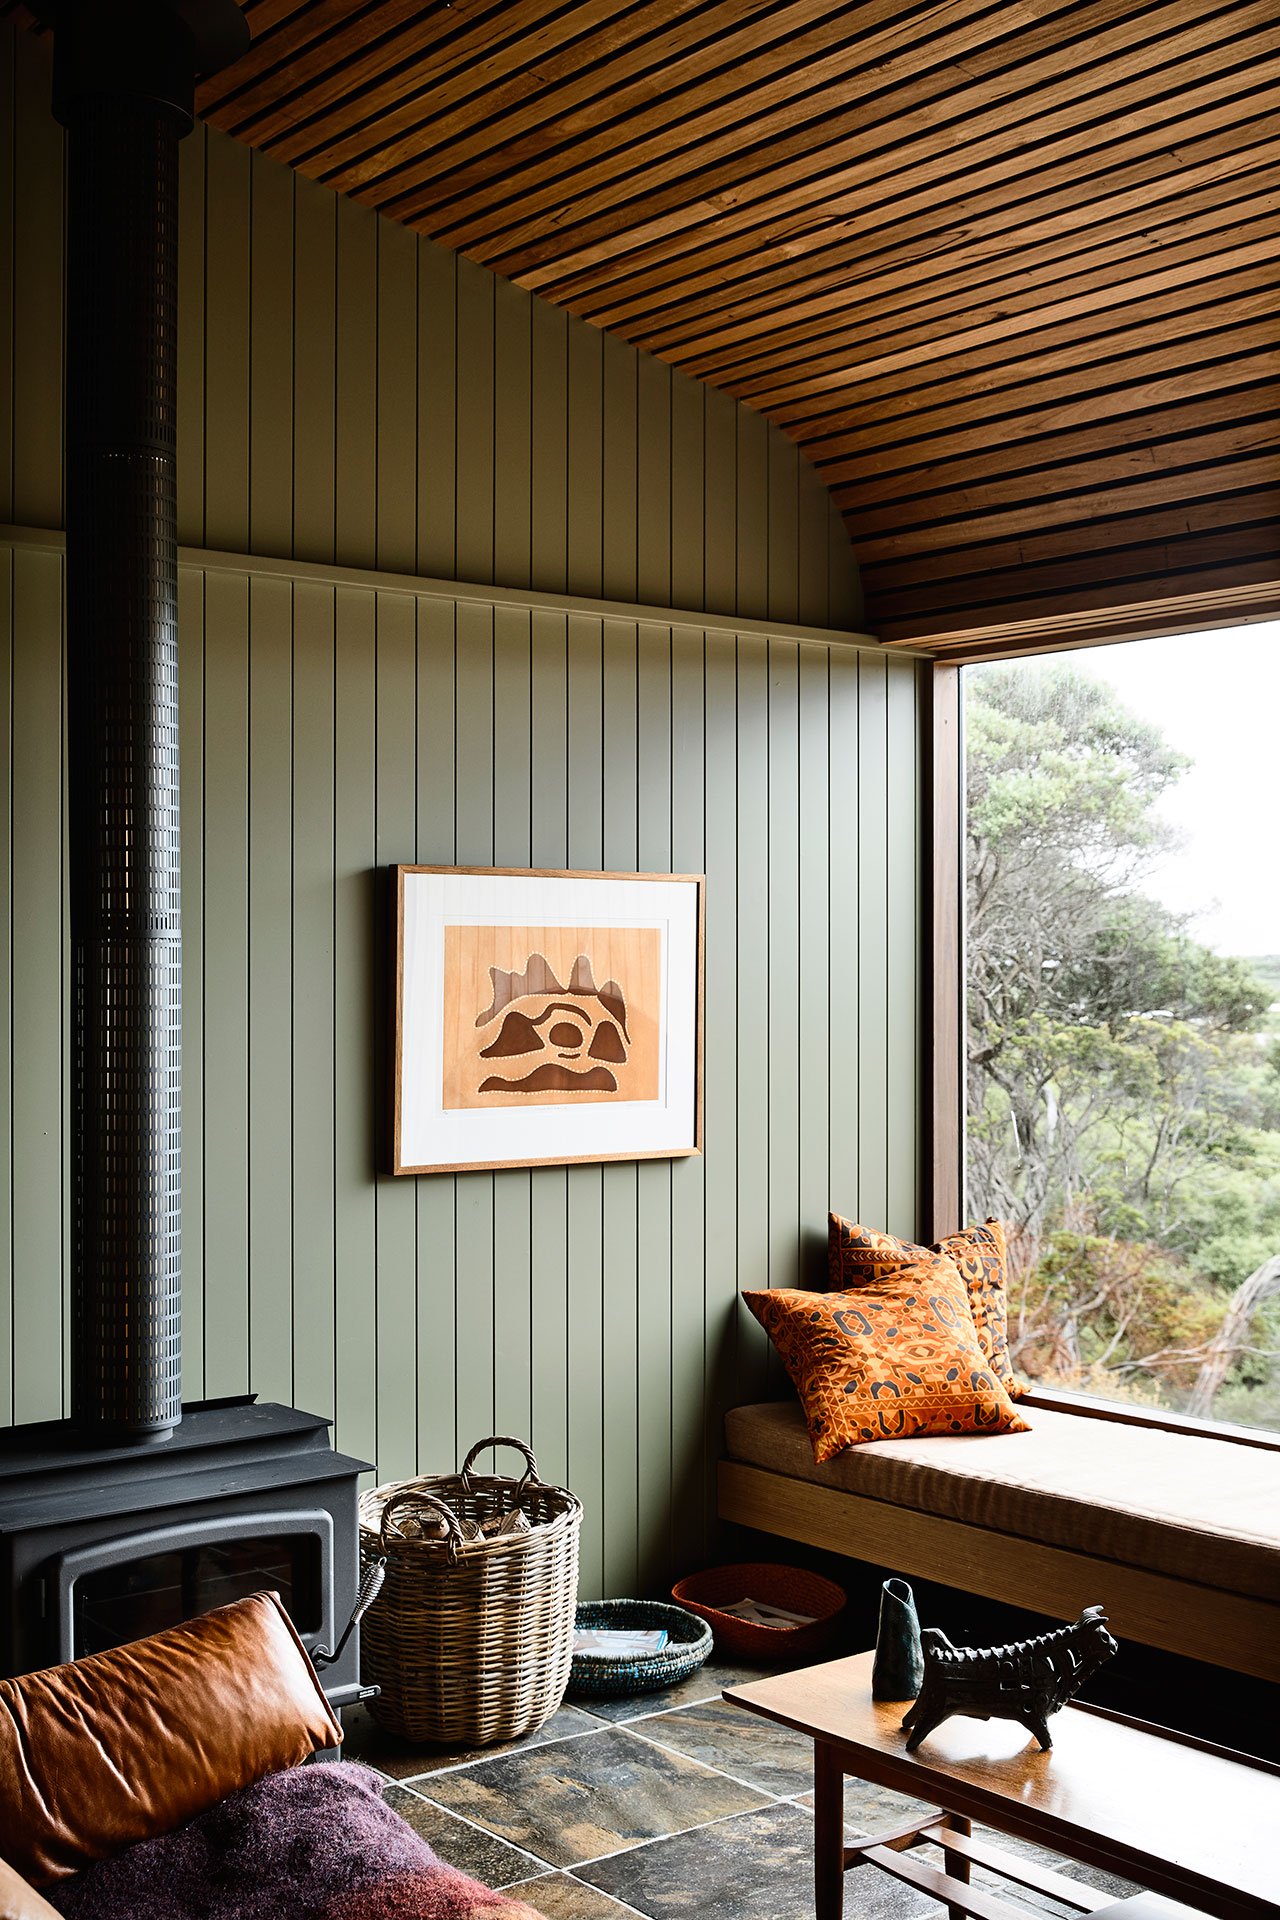 The living room features a wood slab ceiling, sage green wooden walls and a comfy window seat plus a hearth